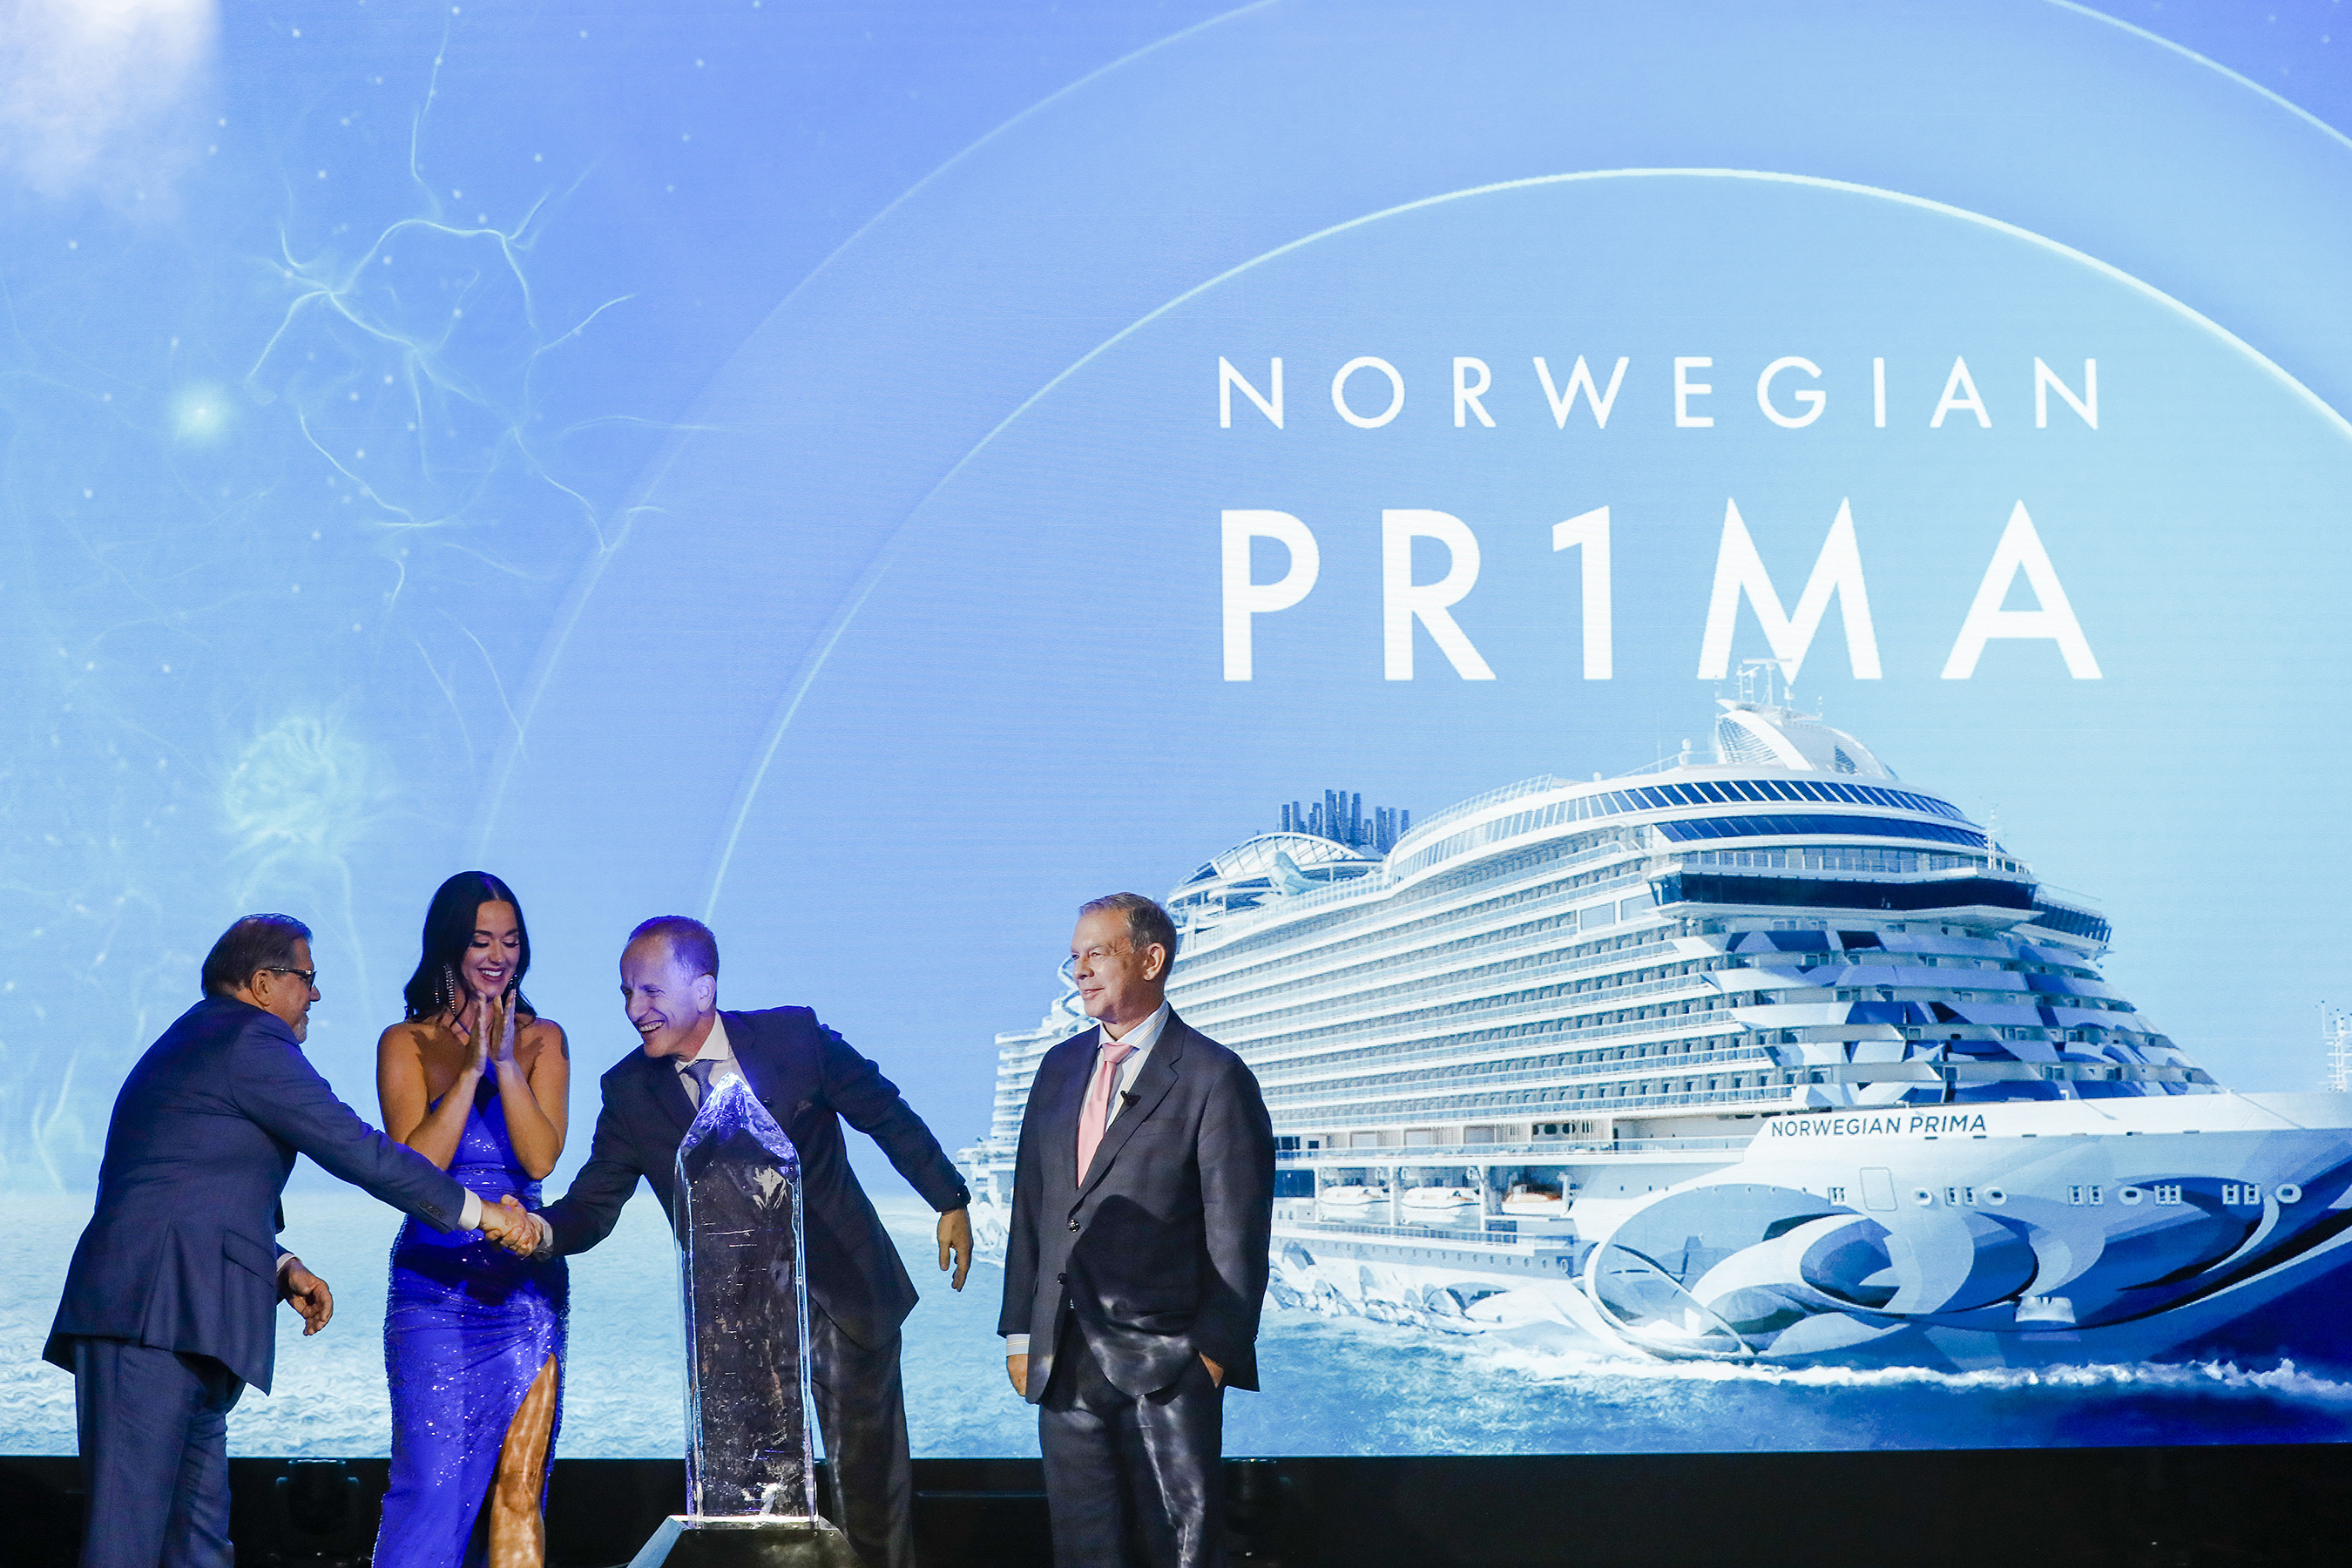 Officially Welcomes Norwegian Prima